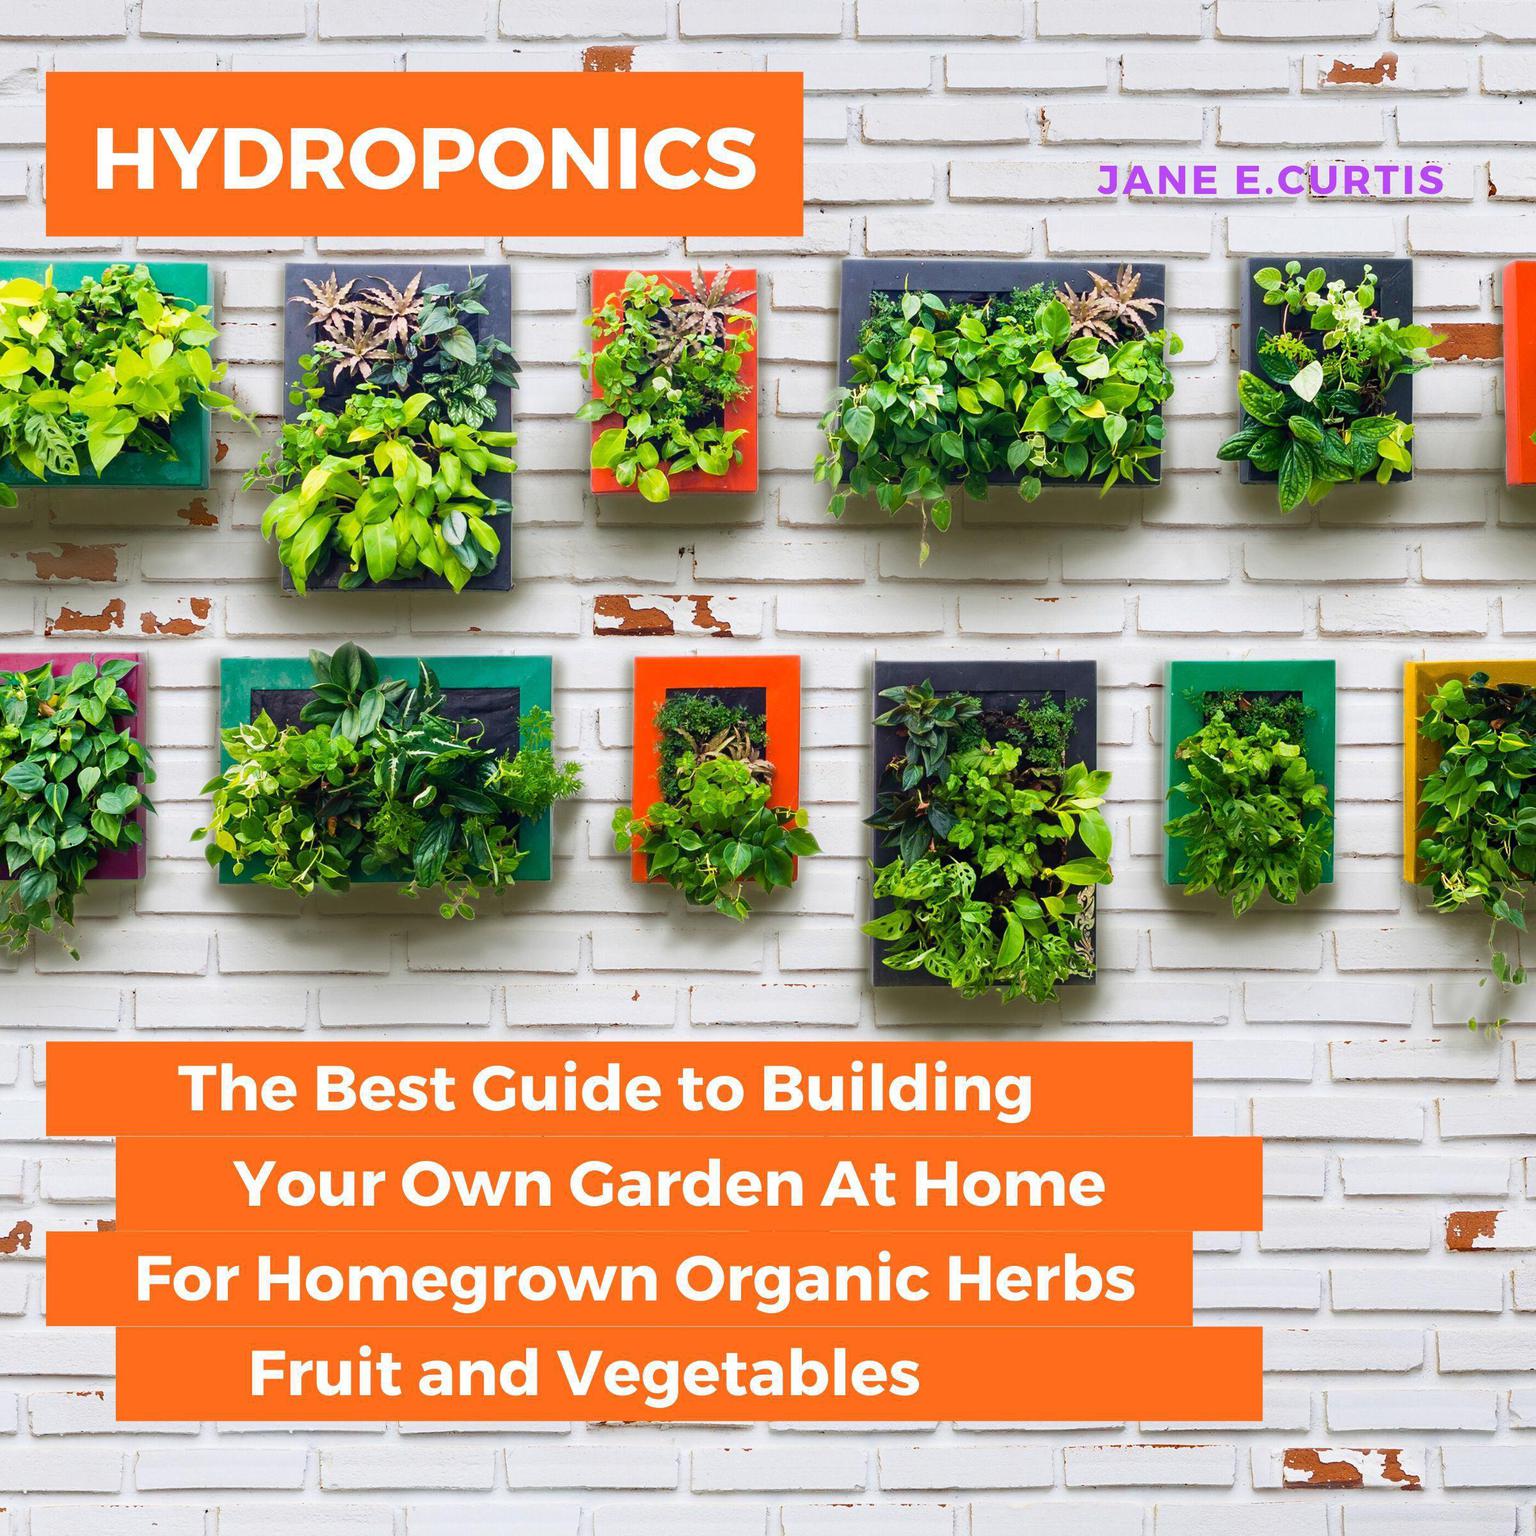 Hydroponics The Best Guide to Building Your Own Garden At Home For Homegrown Organic Herbs, Fruit and Vegetables Audiobook, by Jane E. Curtis